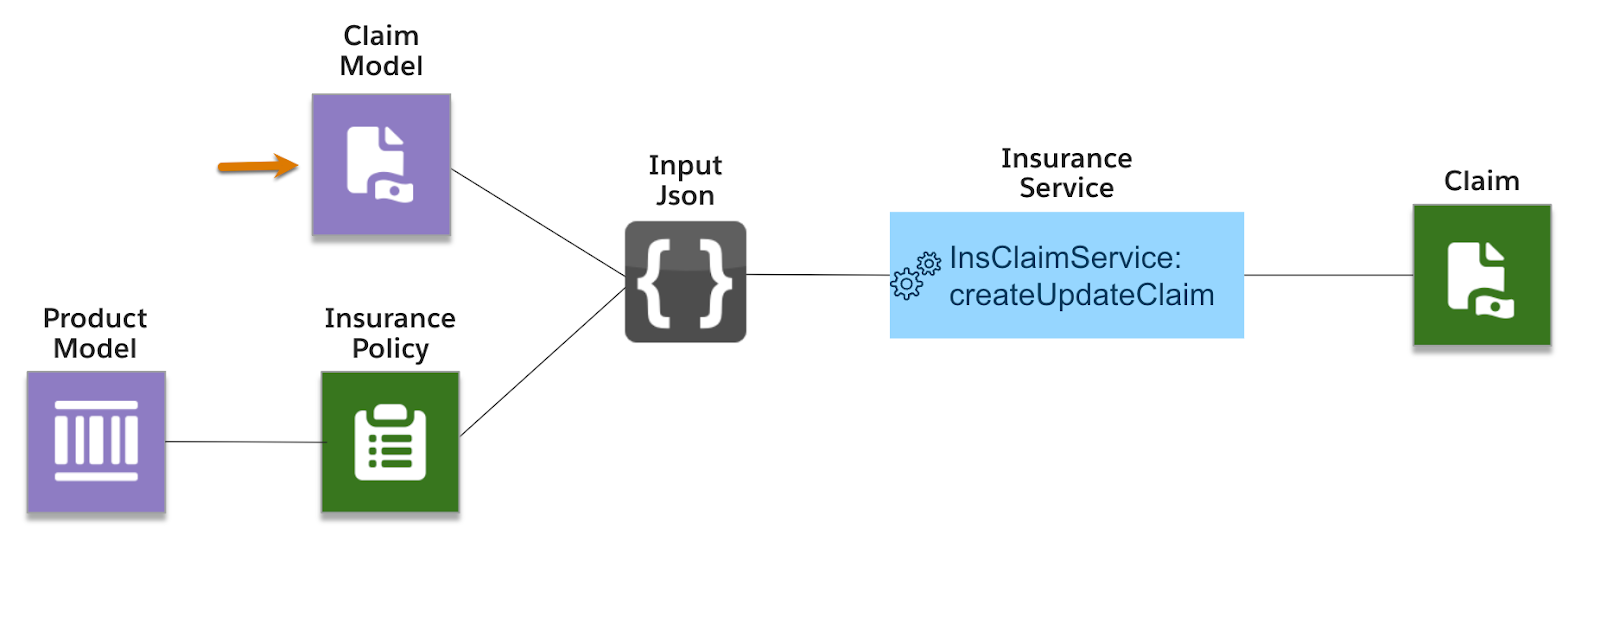 The claim model and the insurance policy form the claim through the input JSON and the insurance service createUpdateClaim.